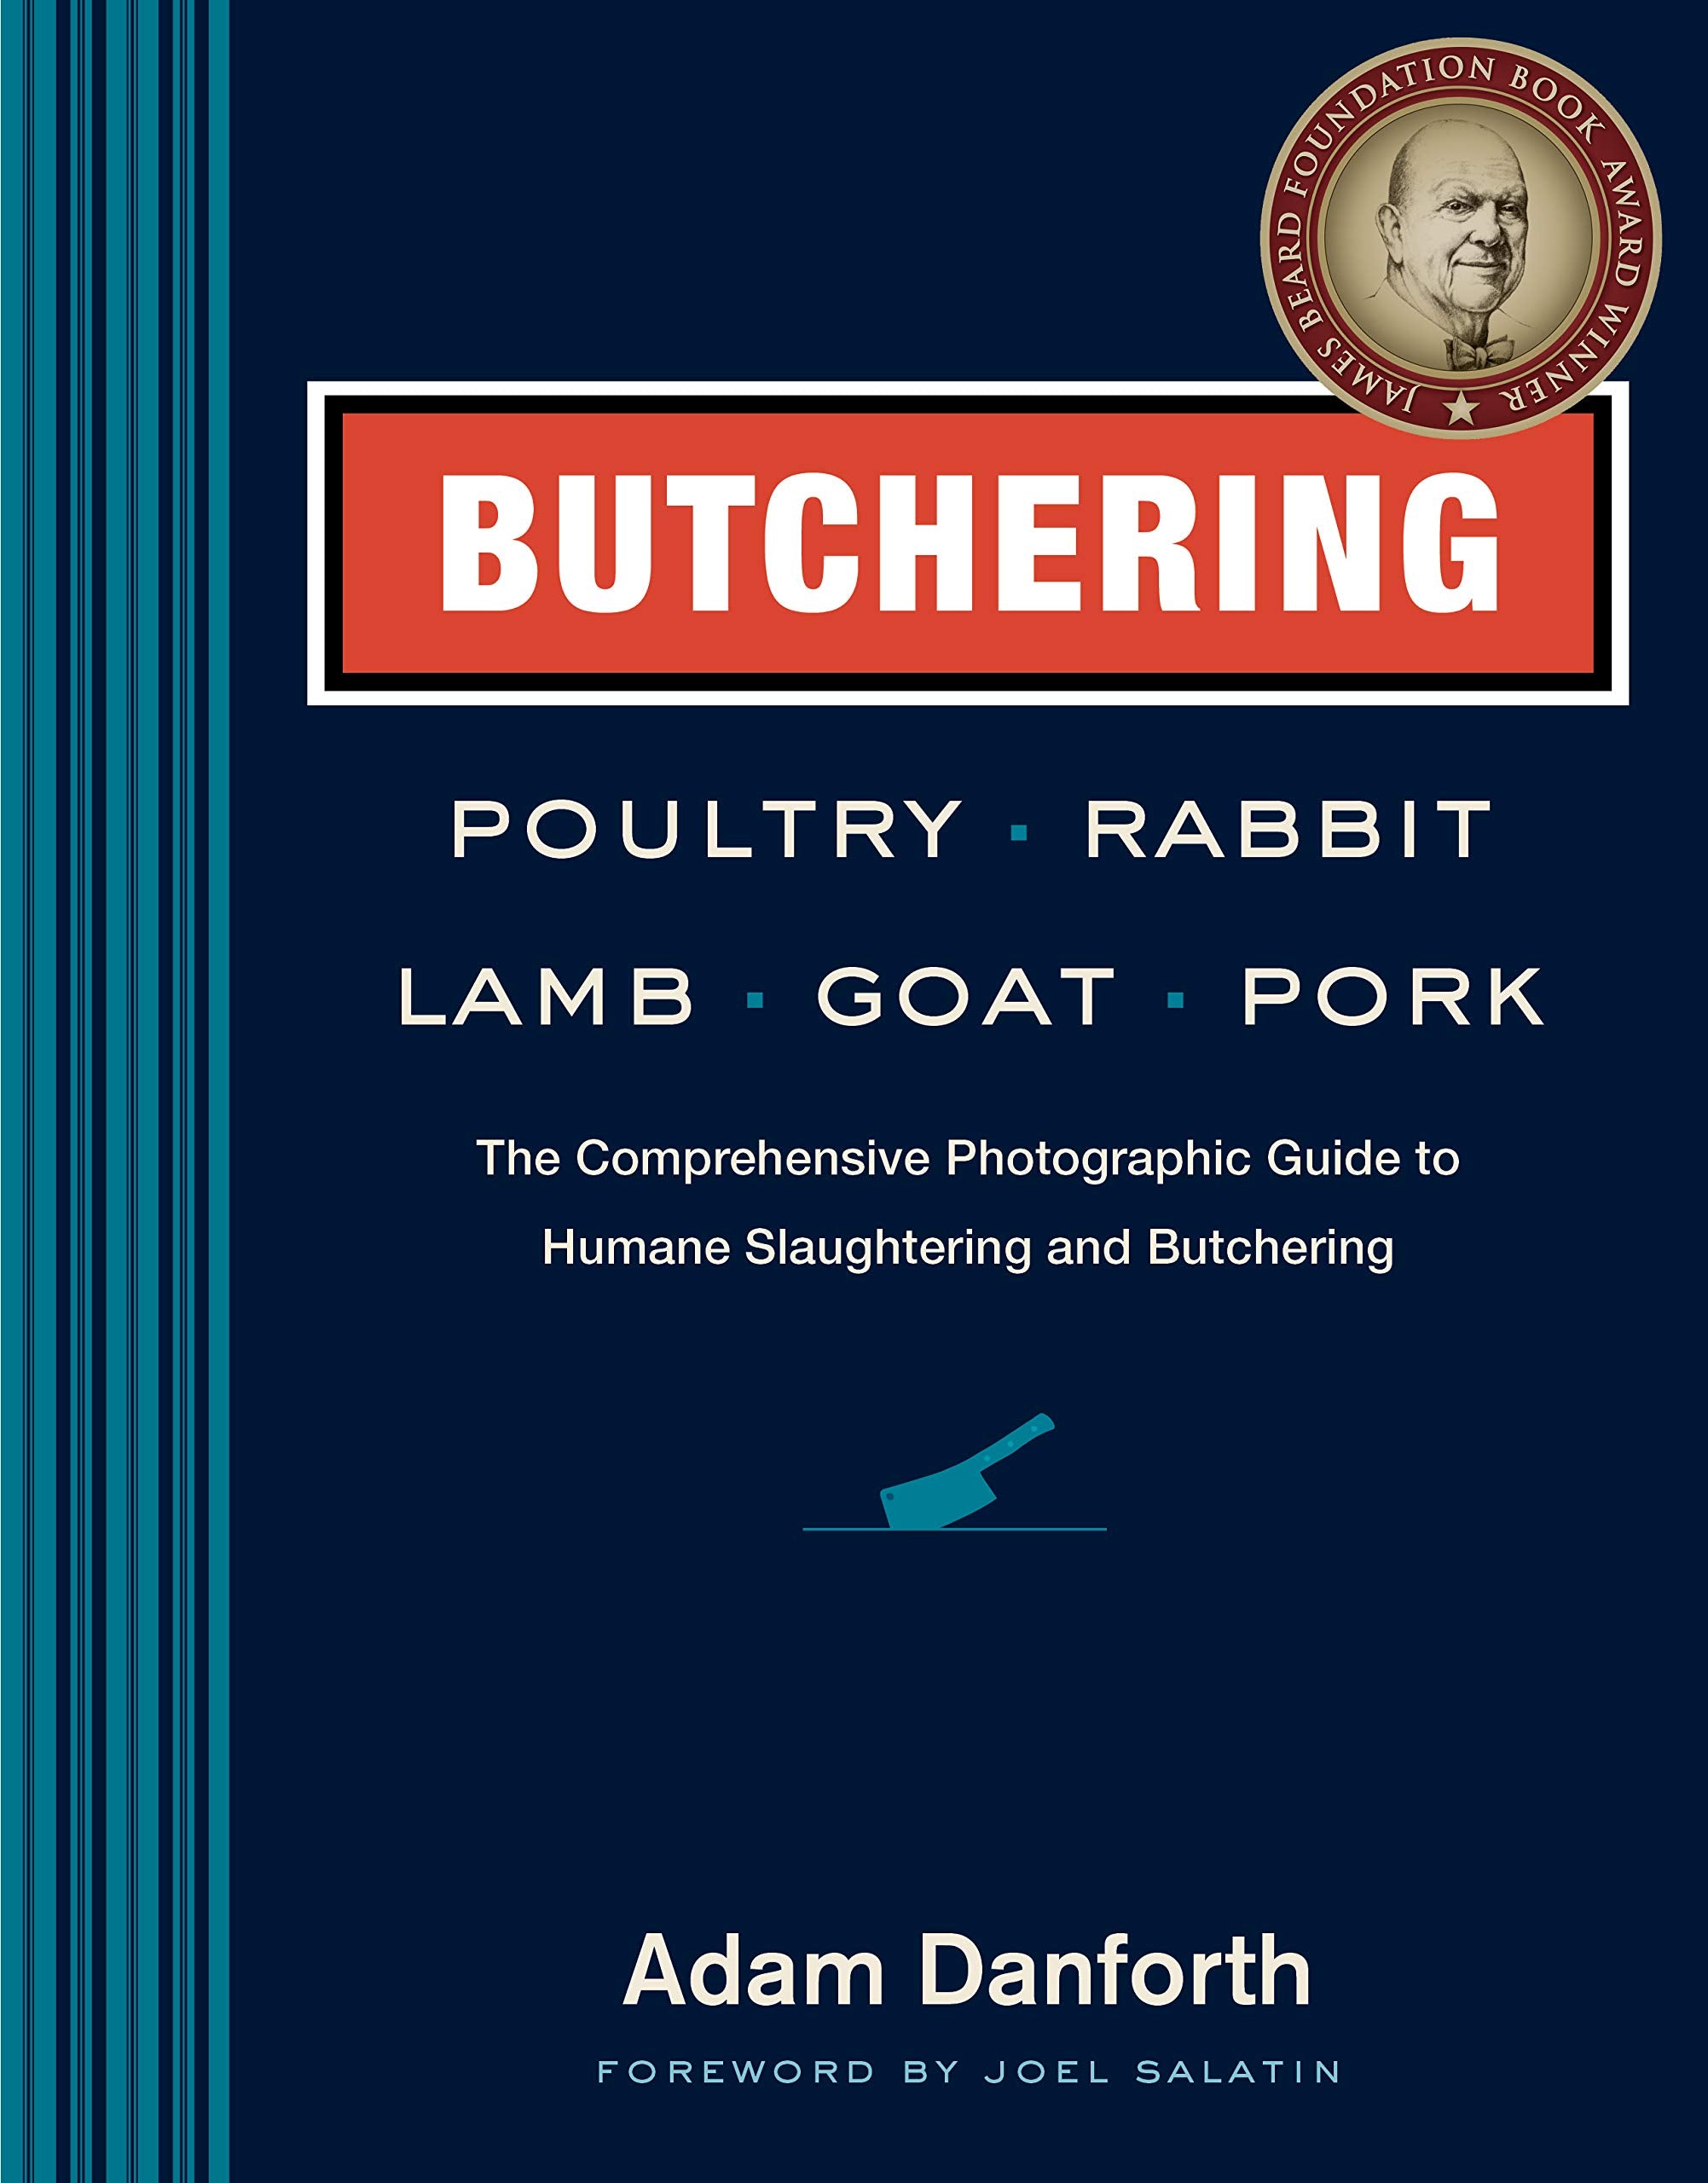 Butchering Poultry, Rabbit, Lamb, Goat, and Pork: The Comprehensive Photographic Guide to Humane Slaughtering and Butchering (Adam Danforth)